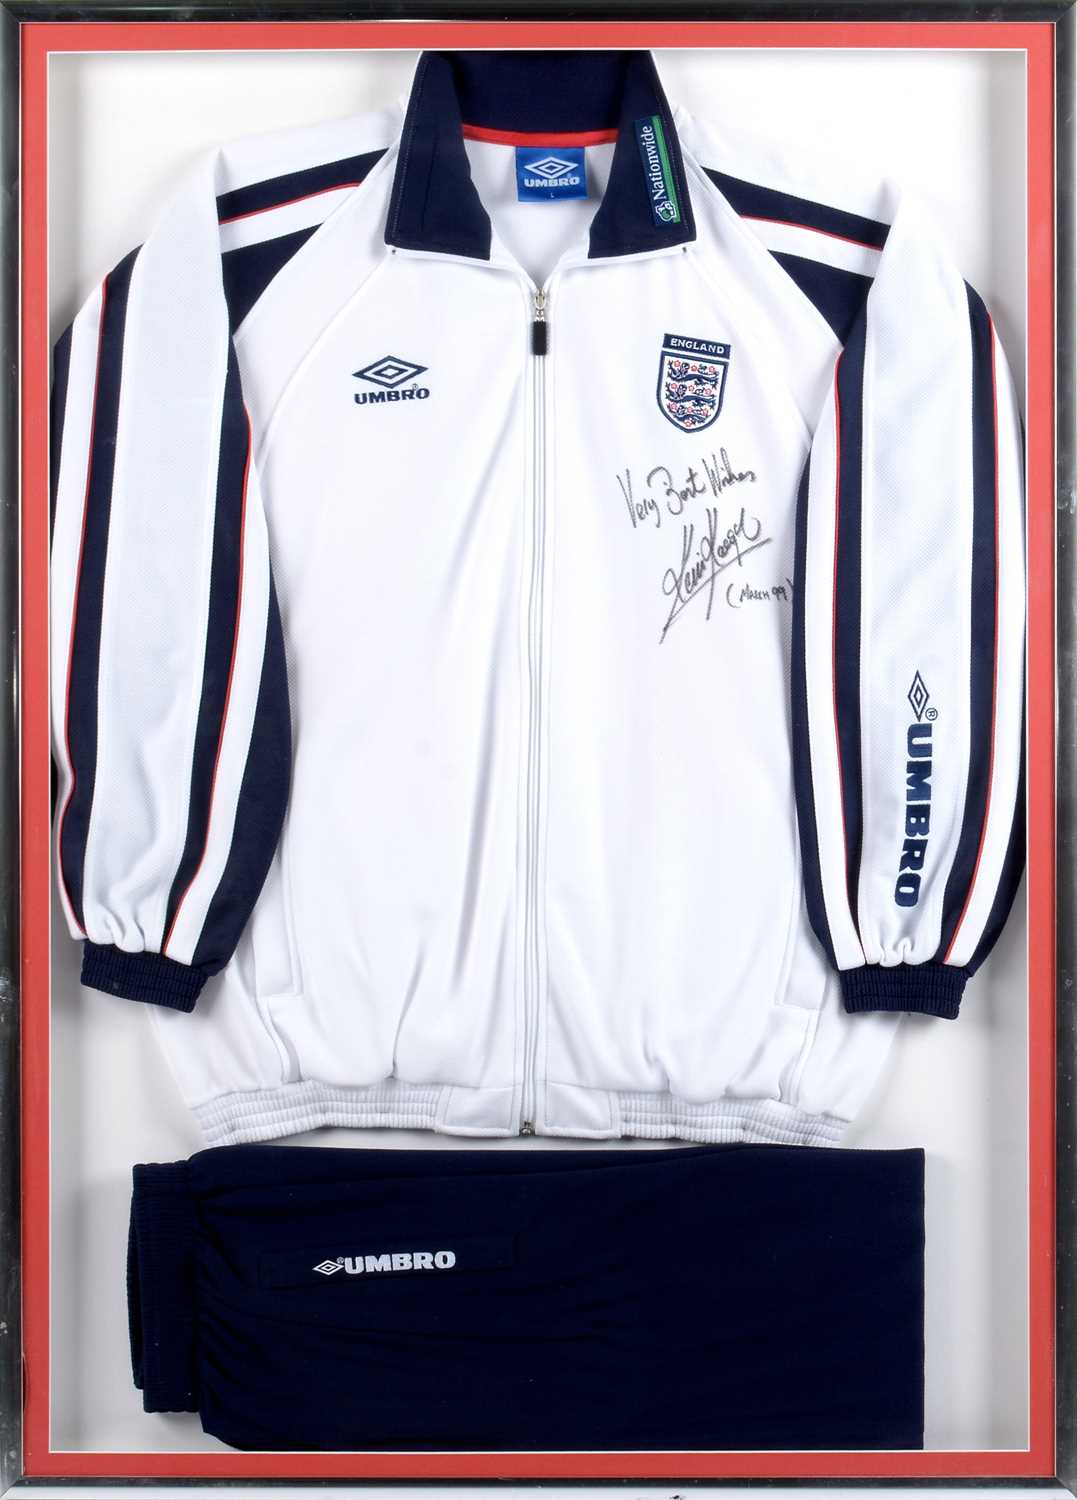 612 - The first England football team tracksuit worn by manager Kevin Keegan.